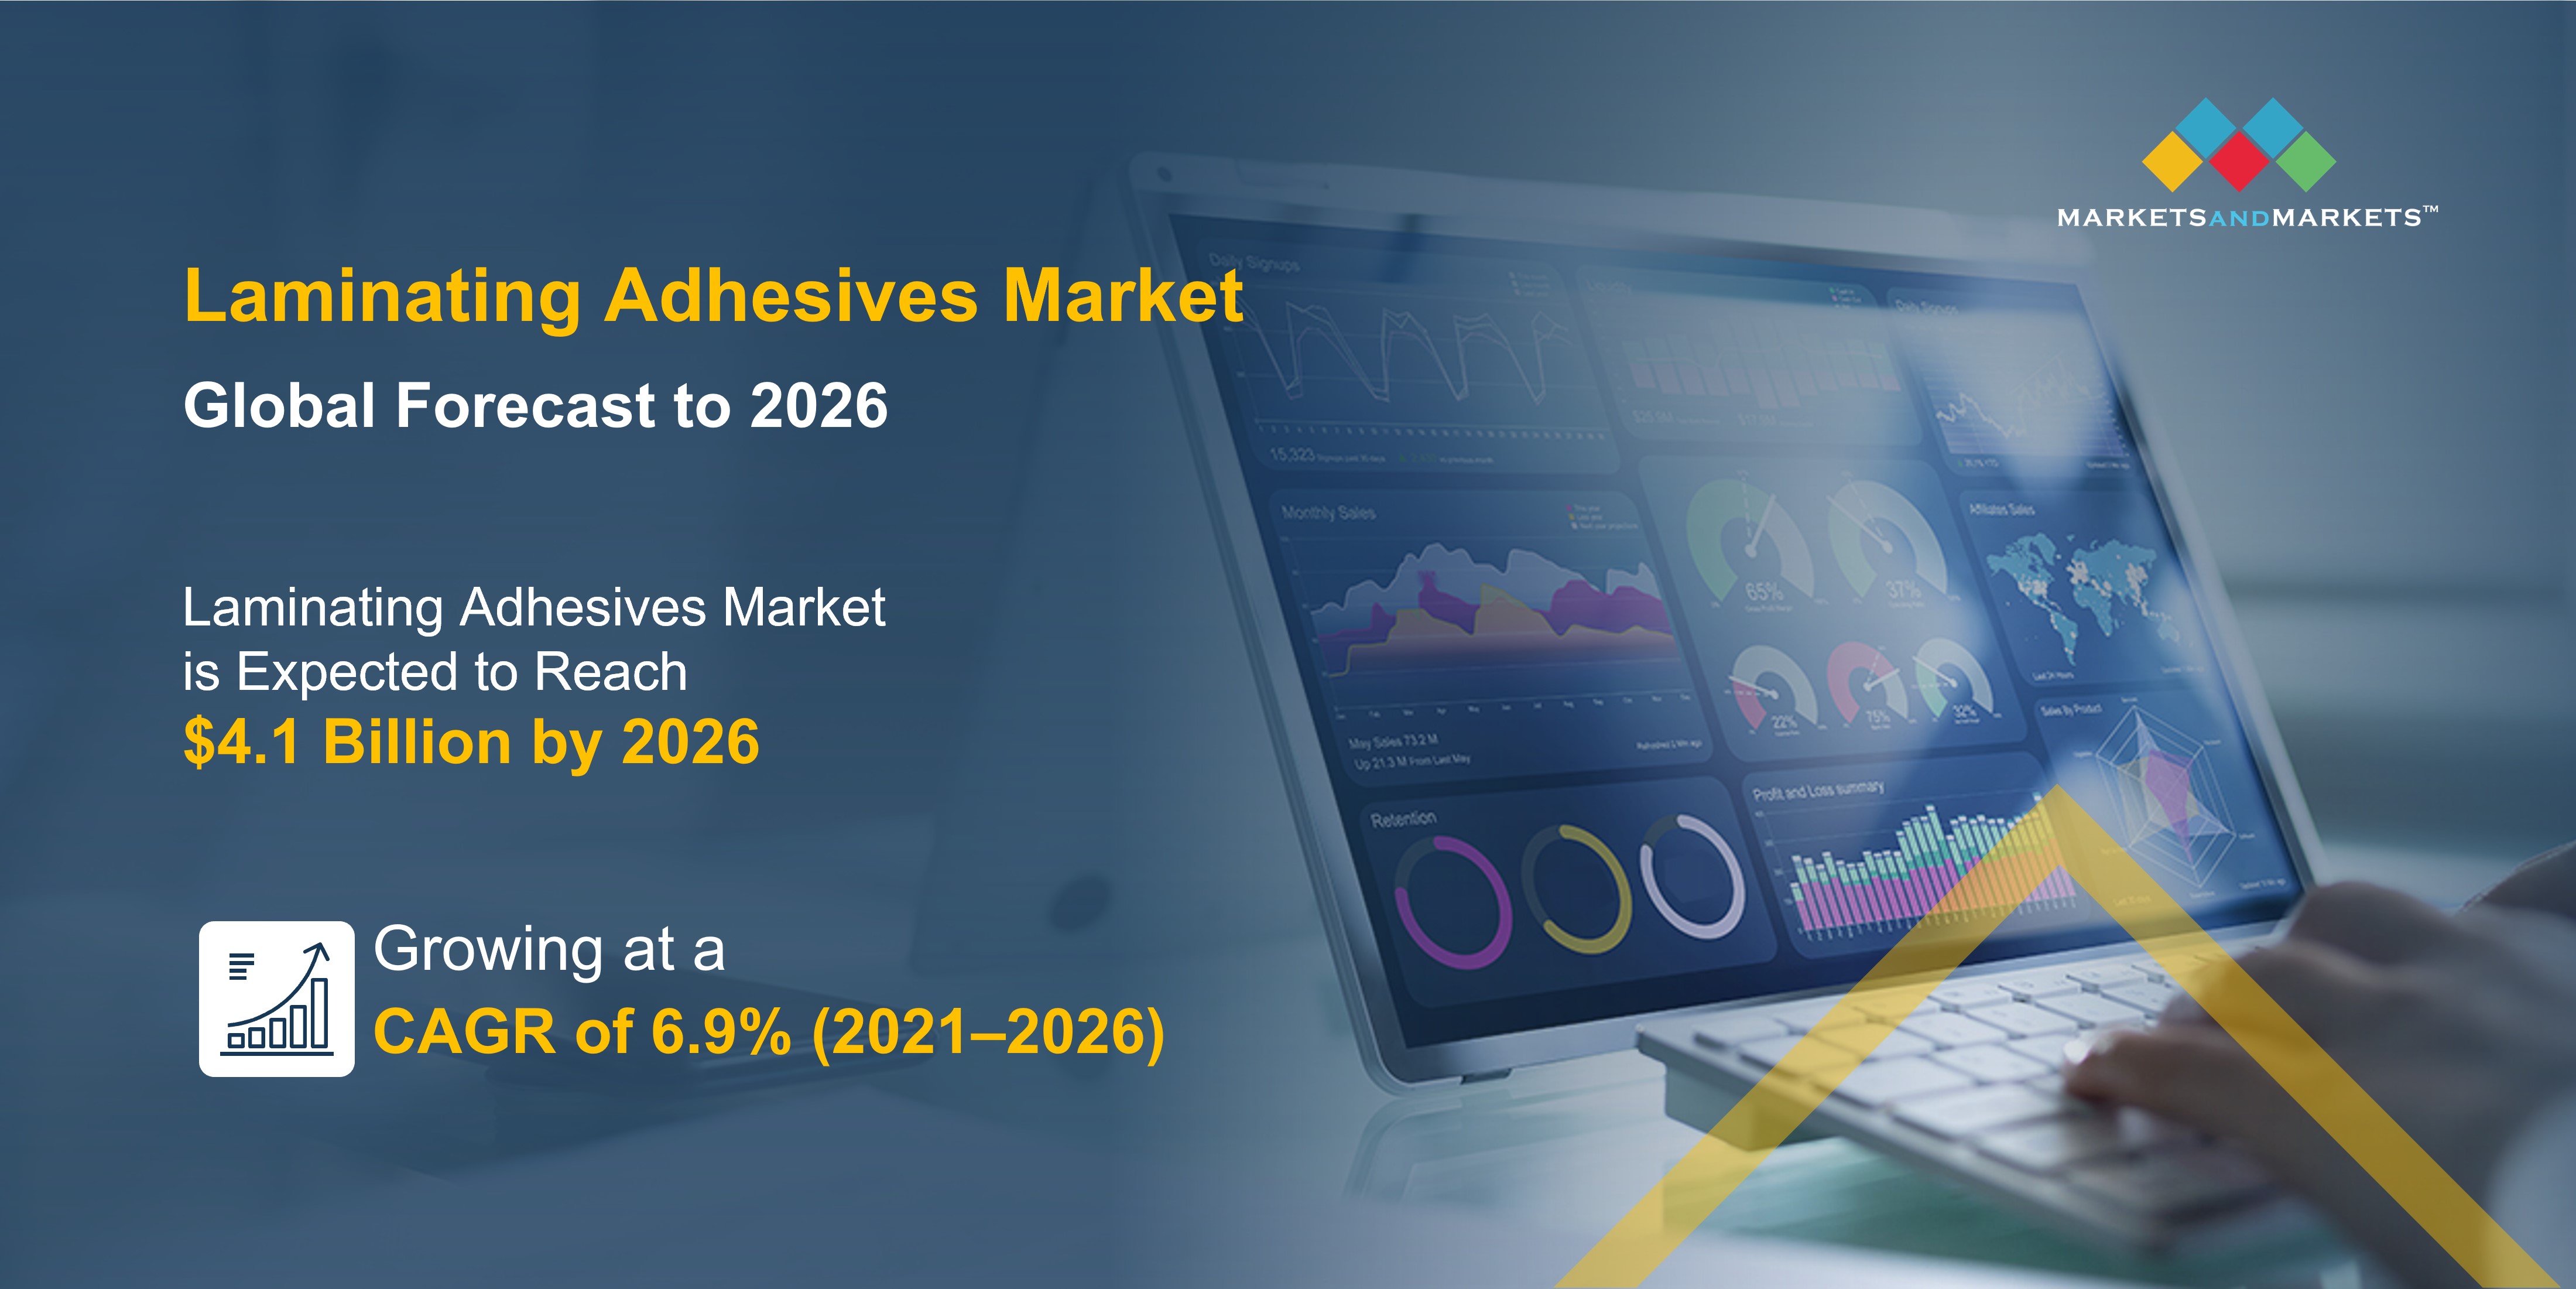 Laminating Adhesives Market is Expected to Expand by US$ 4.1 billion in Revenue Through 2026